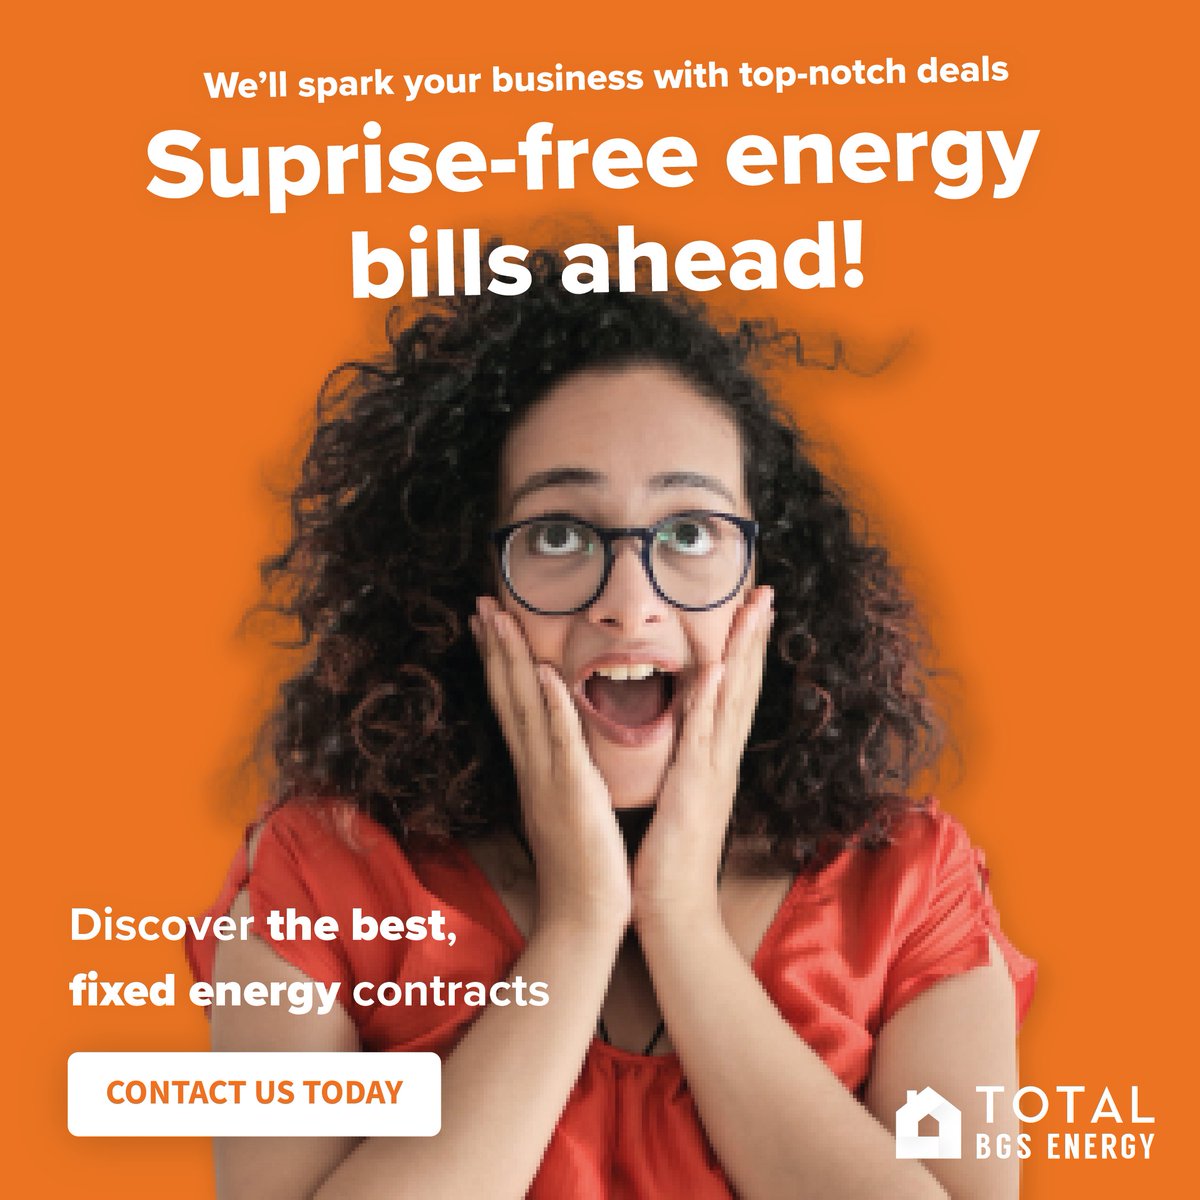 😱 Tired of shocking energy bills and price increases? ⚡

We've got the power to make it a thing of the past! We’re here to light up your business with top-notch deals and ensure you never get caught off guard again and protect you from any price increases. 💡

#UkBusiness